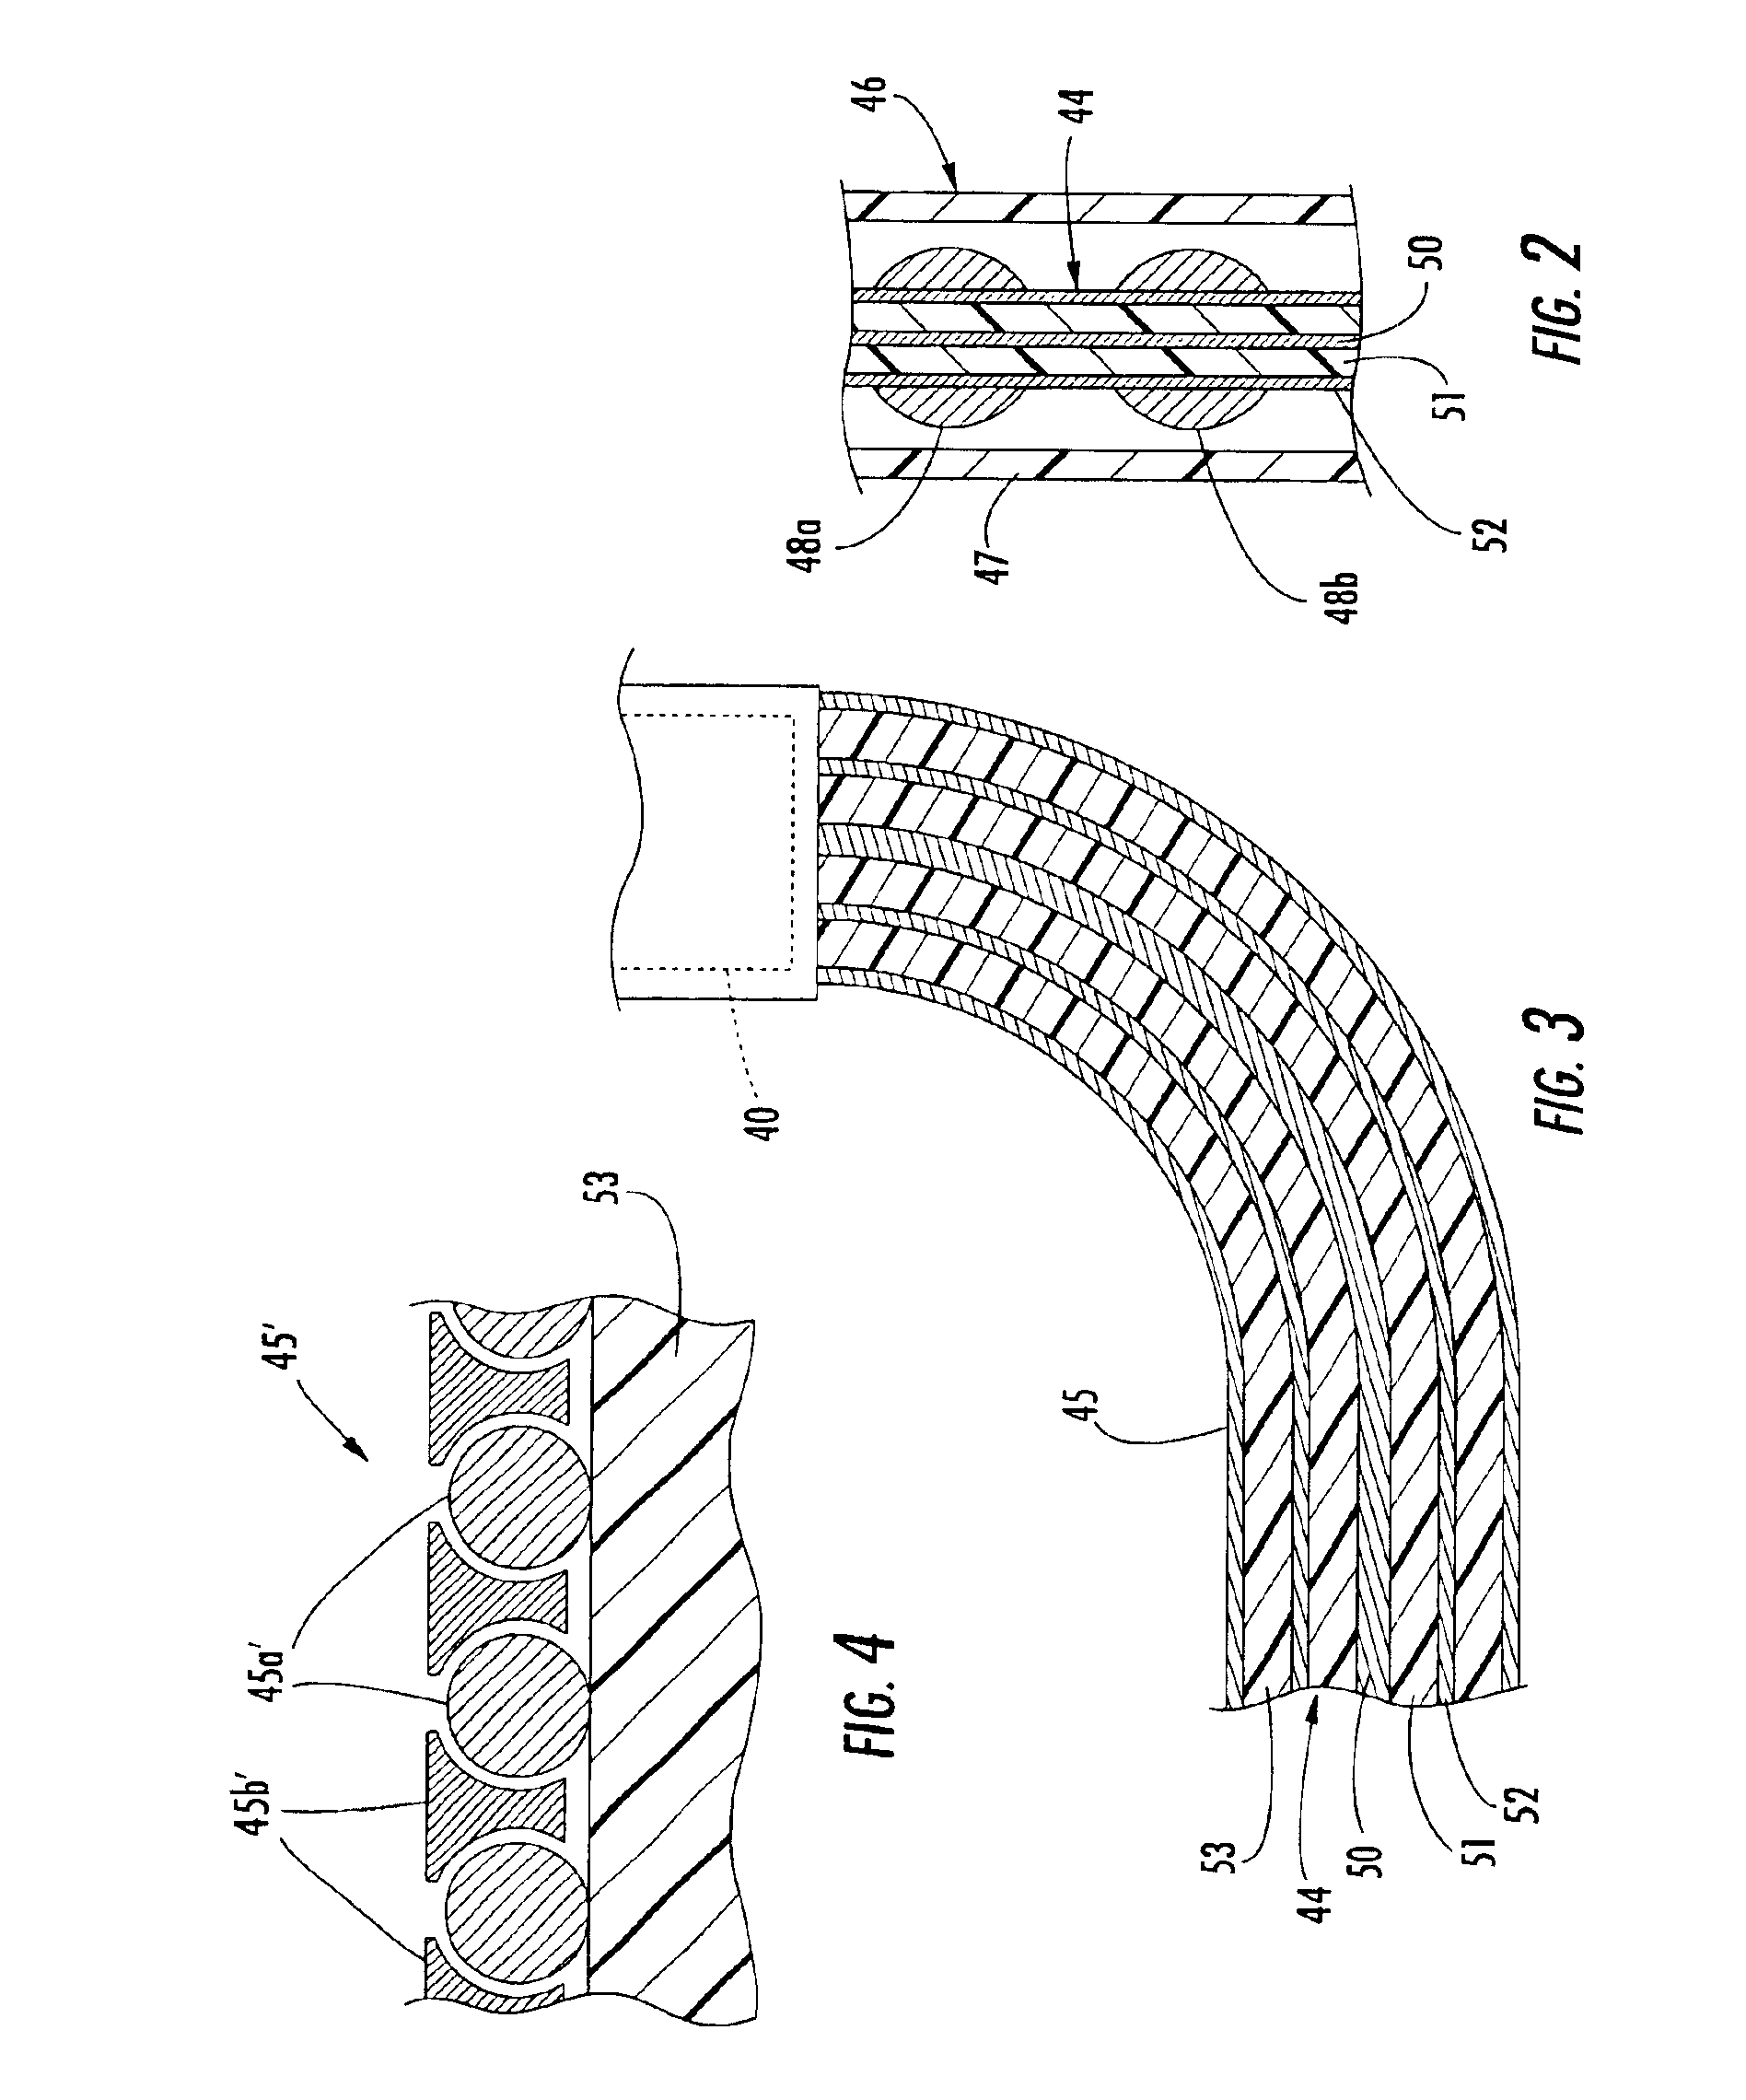 Broadband dipole antenna to be worn by a user and associated methods